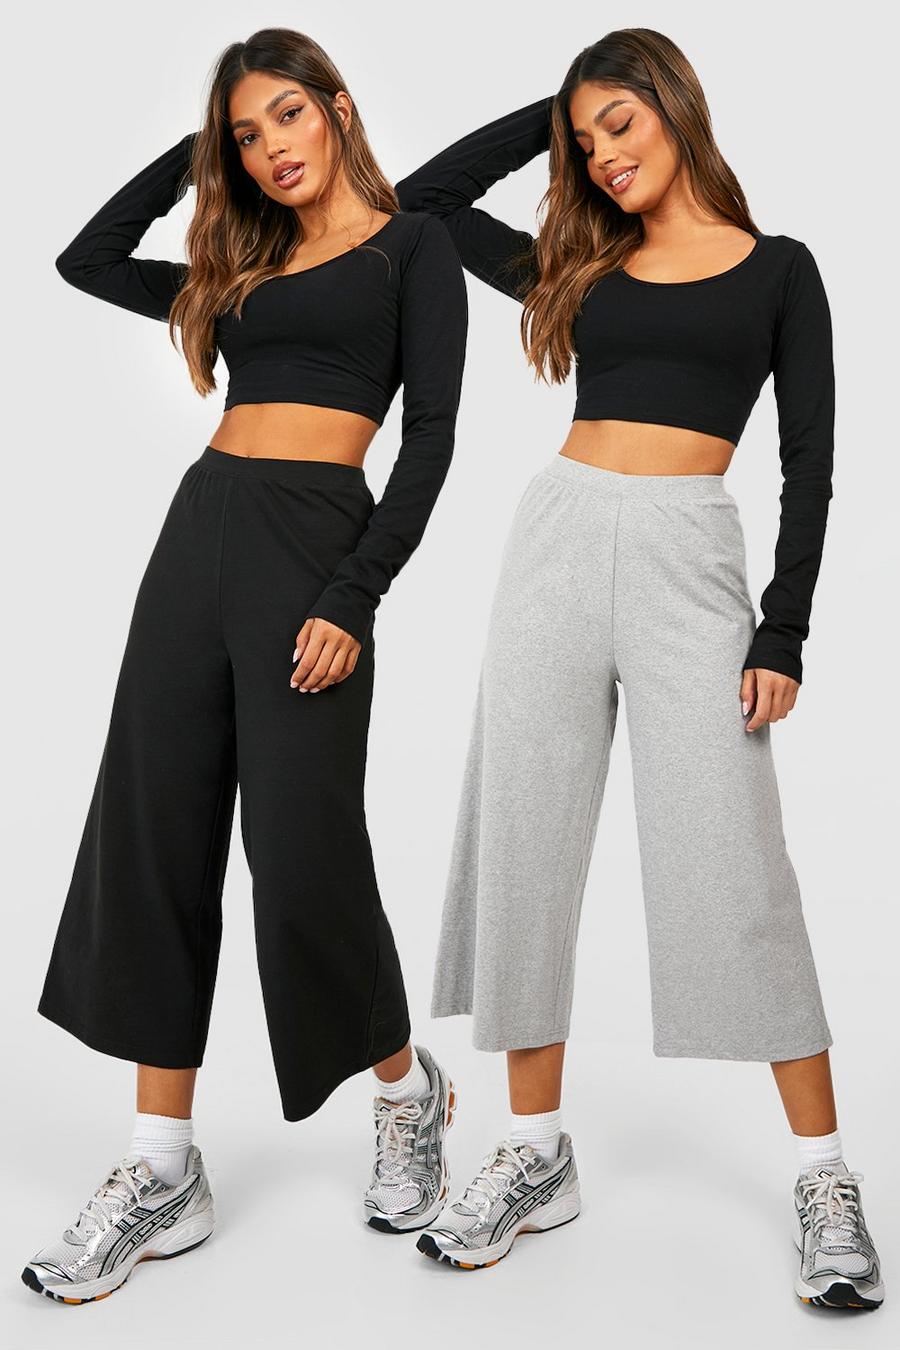 Cotton 2 Pack Black & Grey High Waisted Culotte Trousers